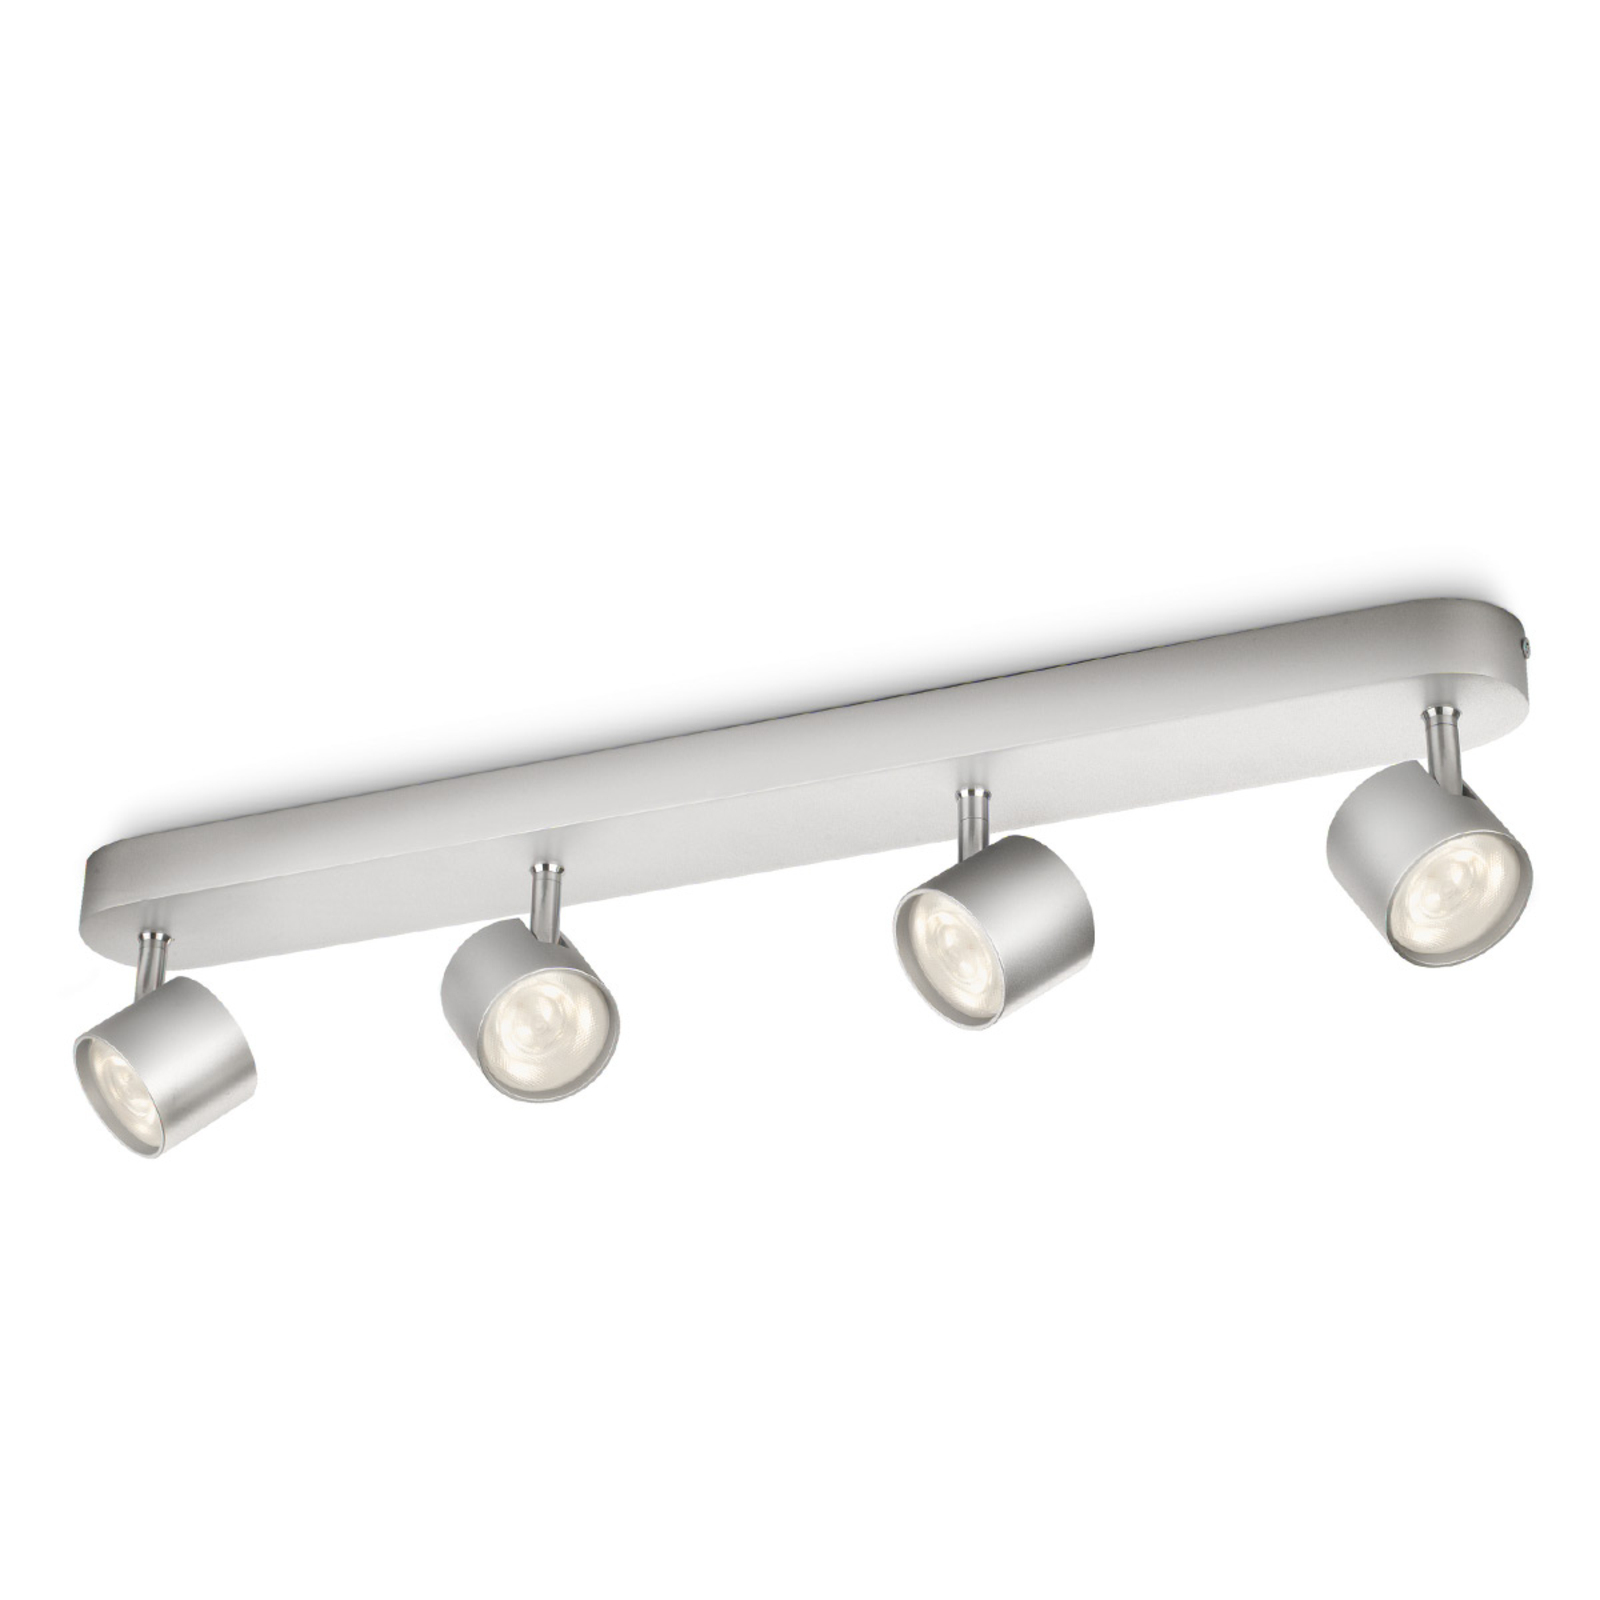 Philips Star foco LED orientable gris 4 luces